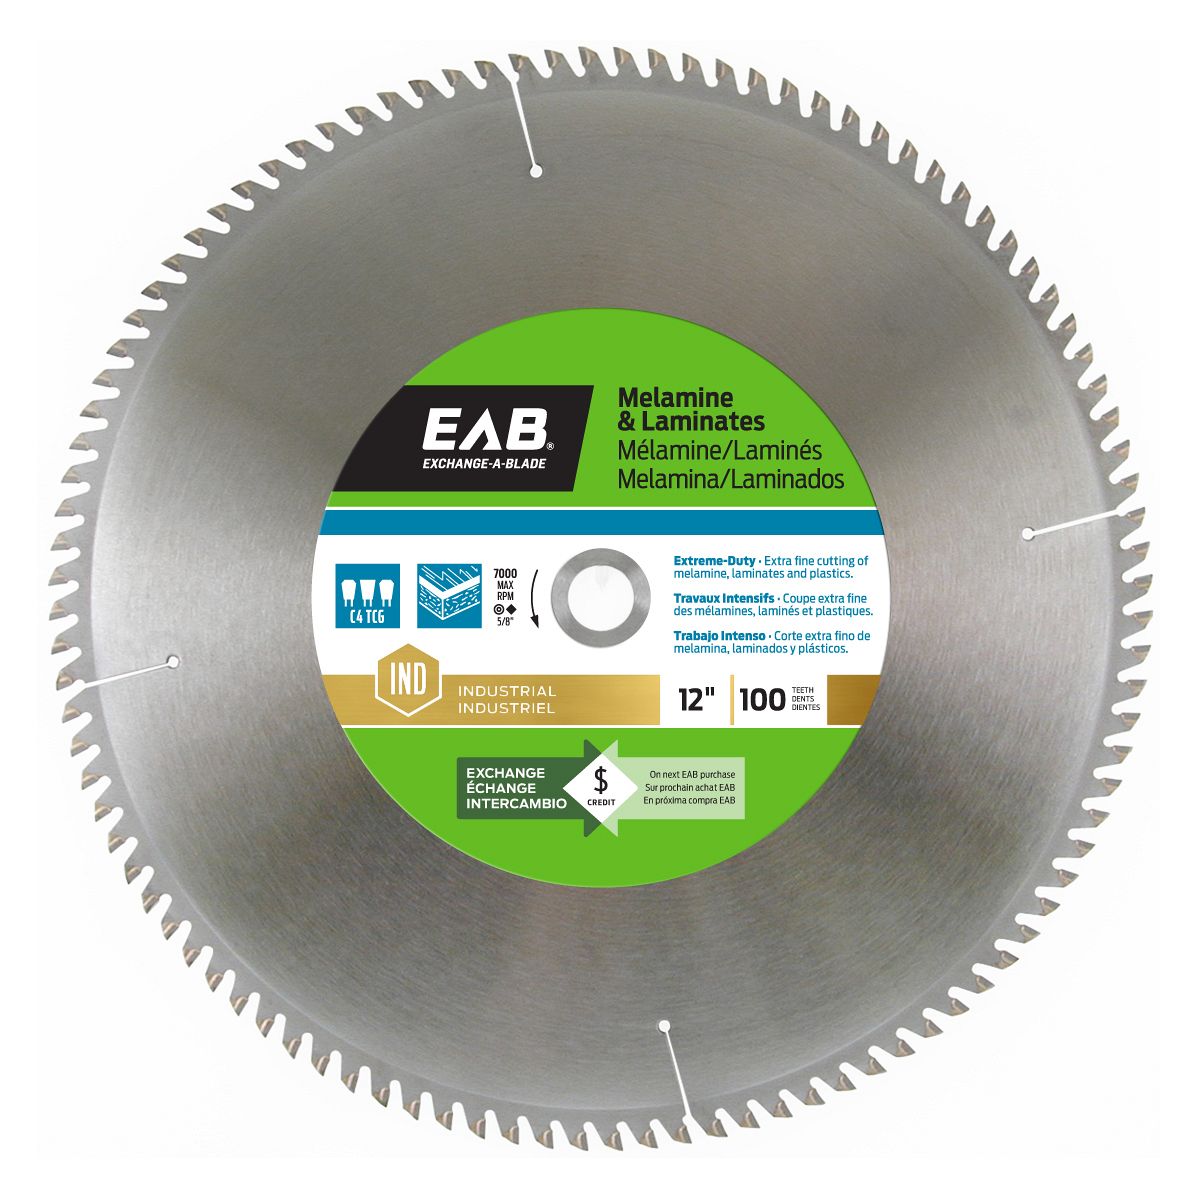 https://www.exchangeablade.com/image/w1500/files/products/exchangeable-melamine-laminate-saw-blade-eab-industrial-12in-100t-1014922-1.jpg